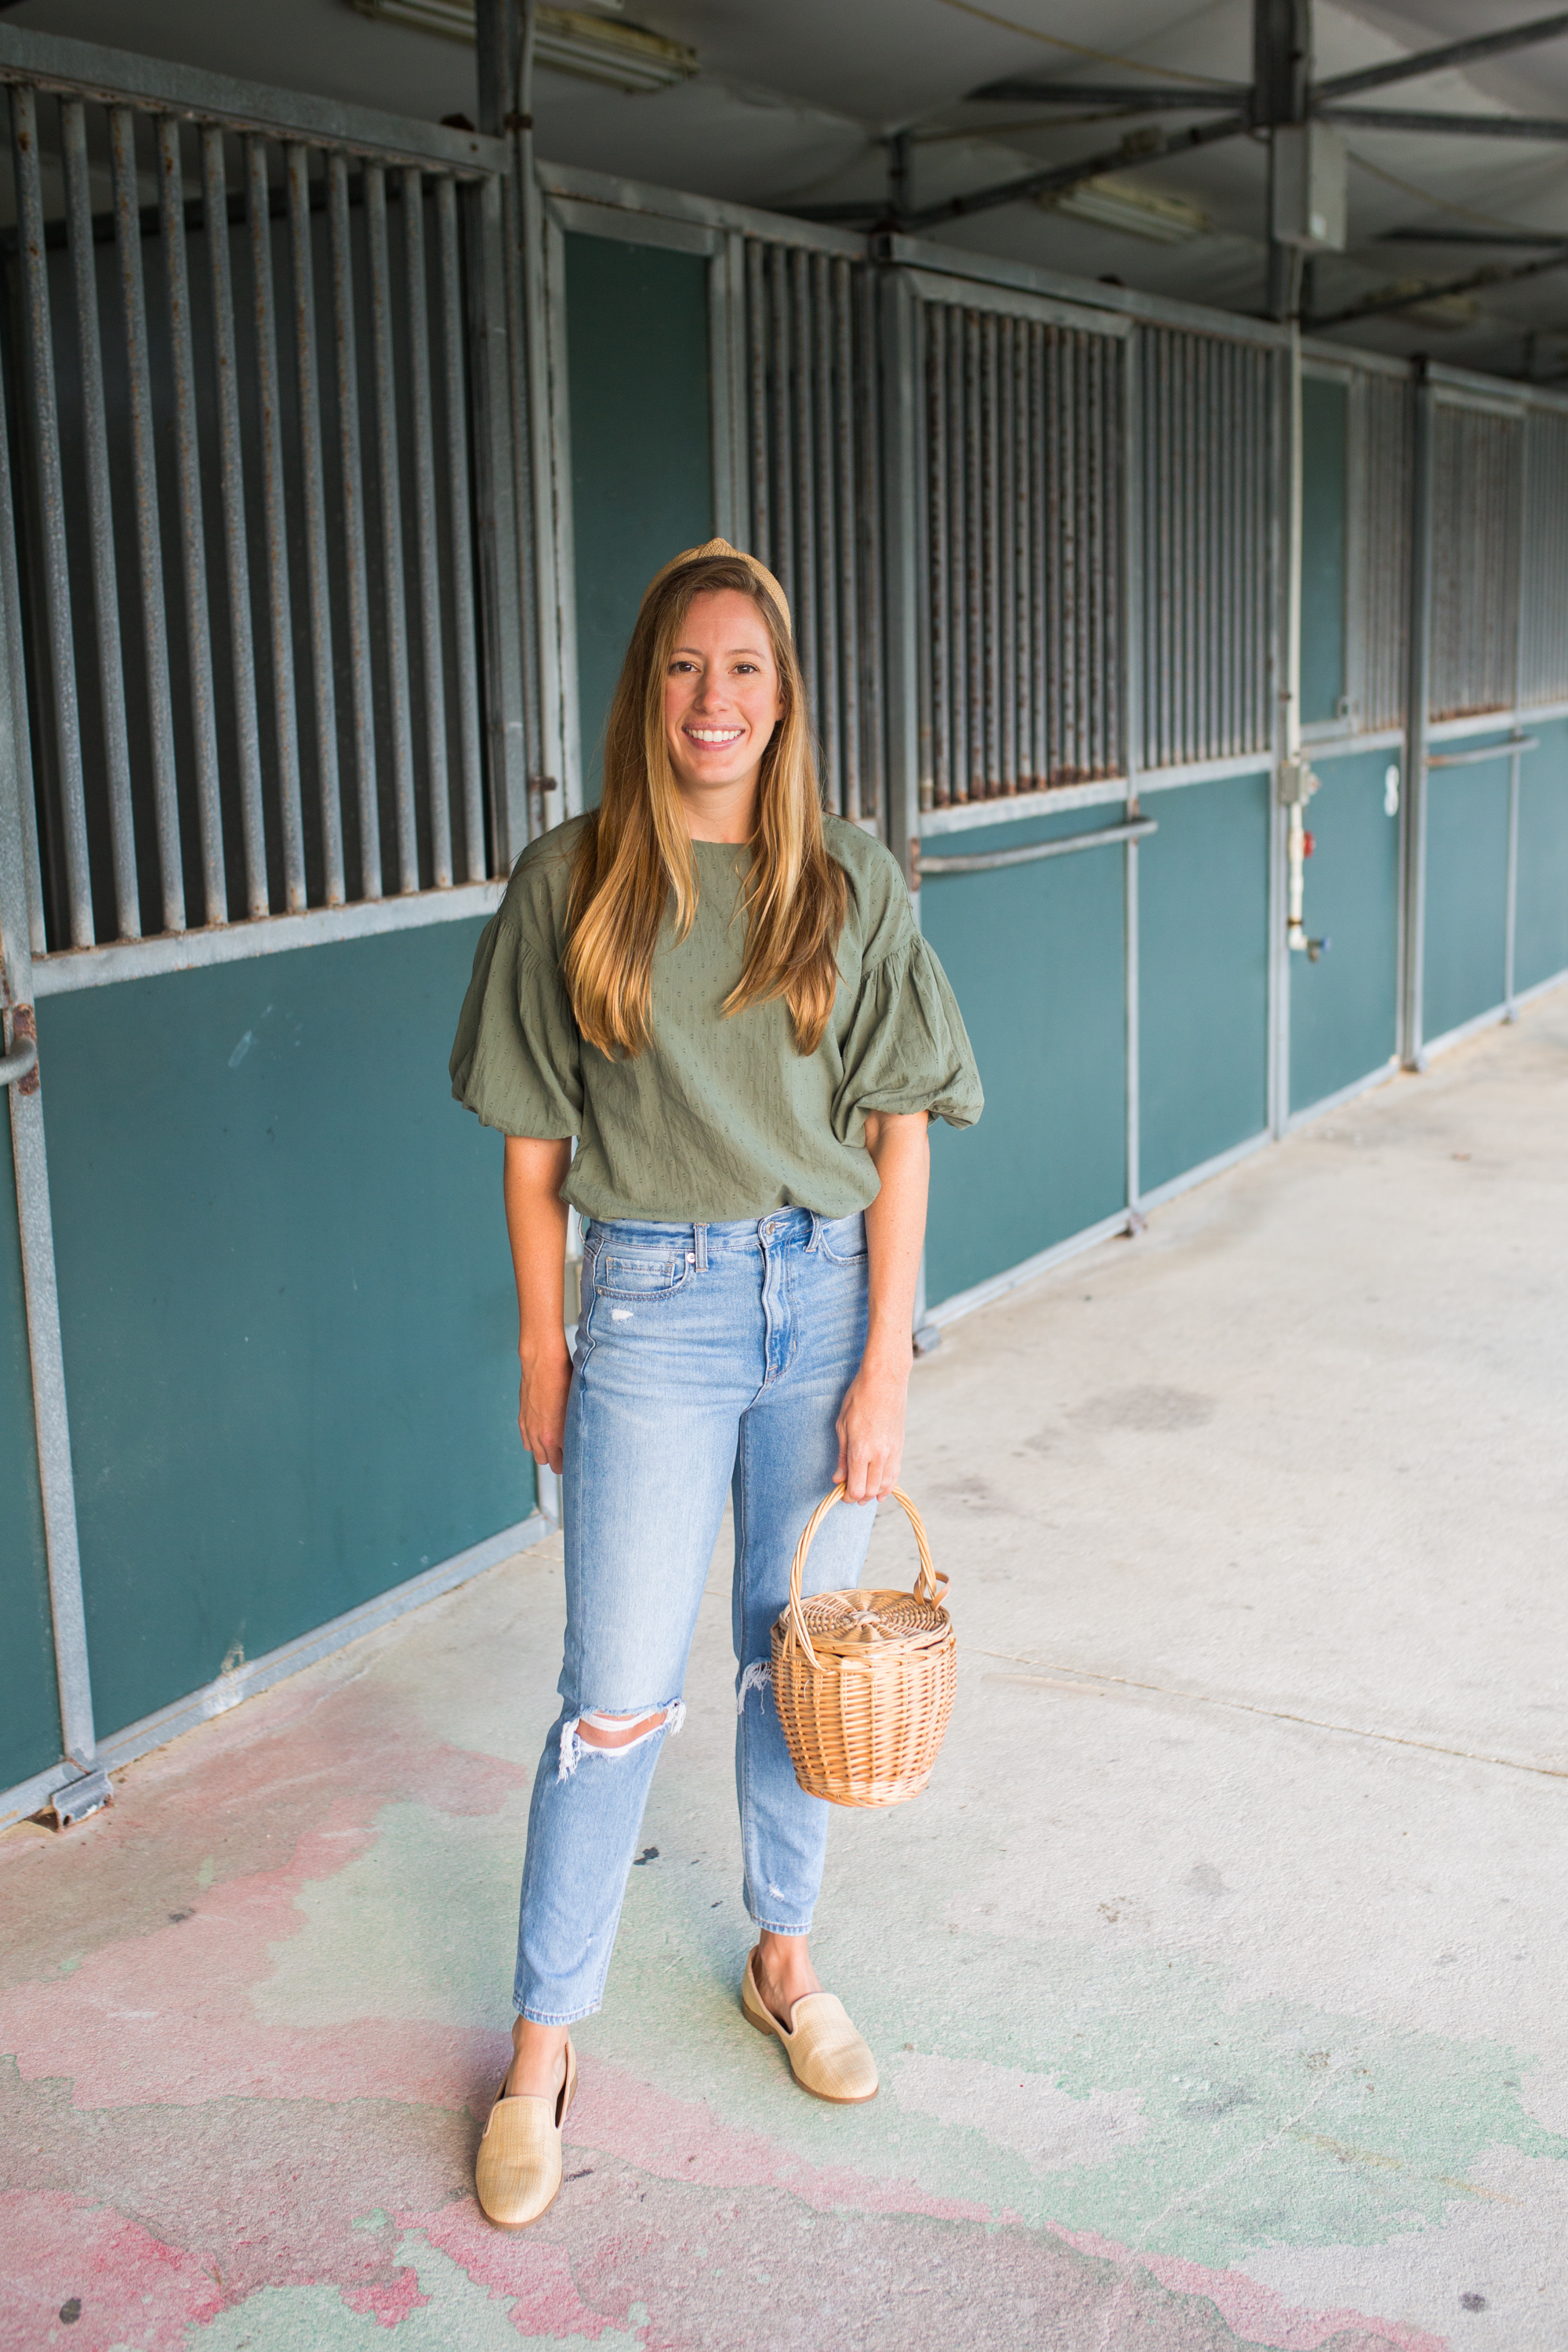 How to Style Mom Jeans for Fall / Cute Fall Outfits / Autumn Outfits / Casual Fall Outfits / Mom Jeans Outfit Fall / Outfit Ideas with Mom Jeans / Puff Sleeve Top - Sunshine Style, A Florida Fashion and Lifestyle Blog by Katie